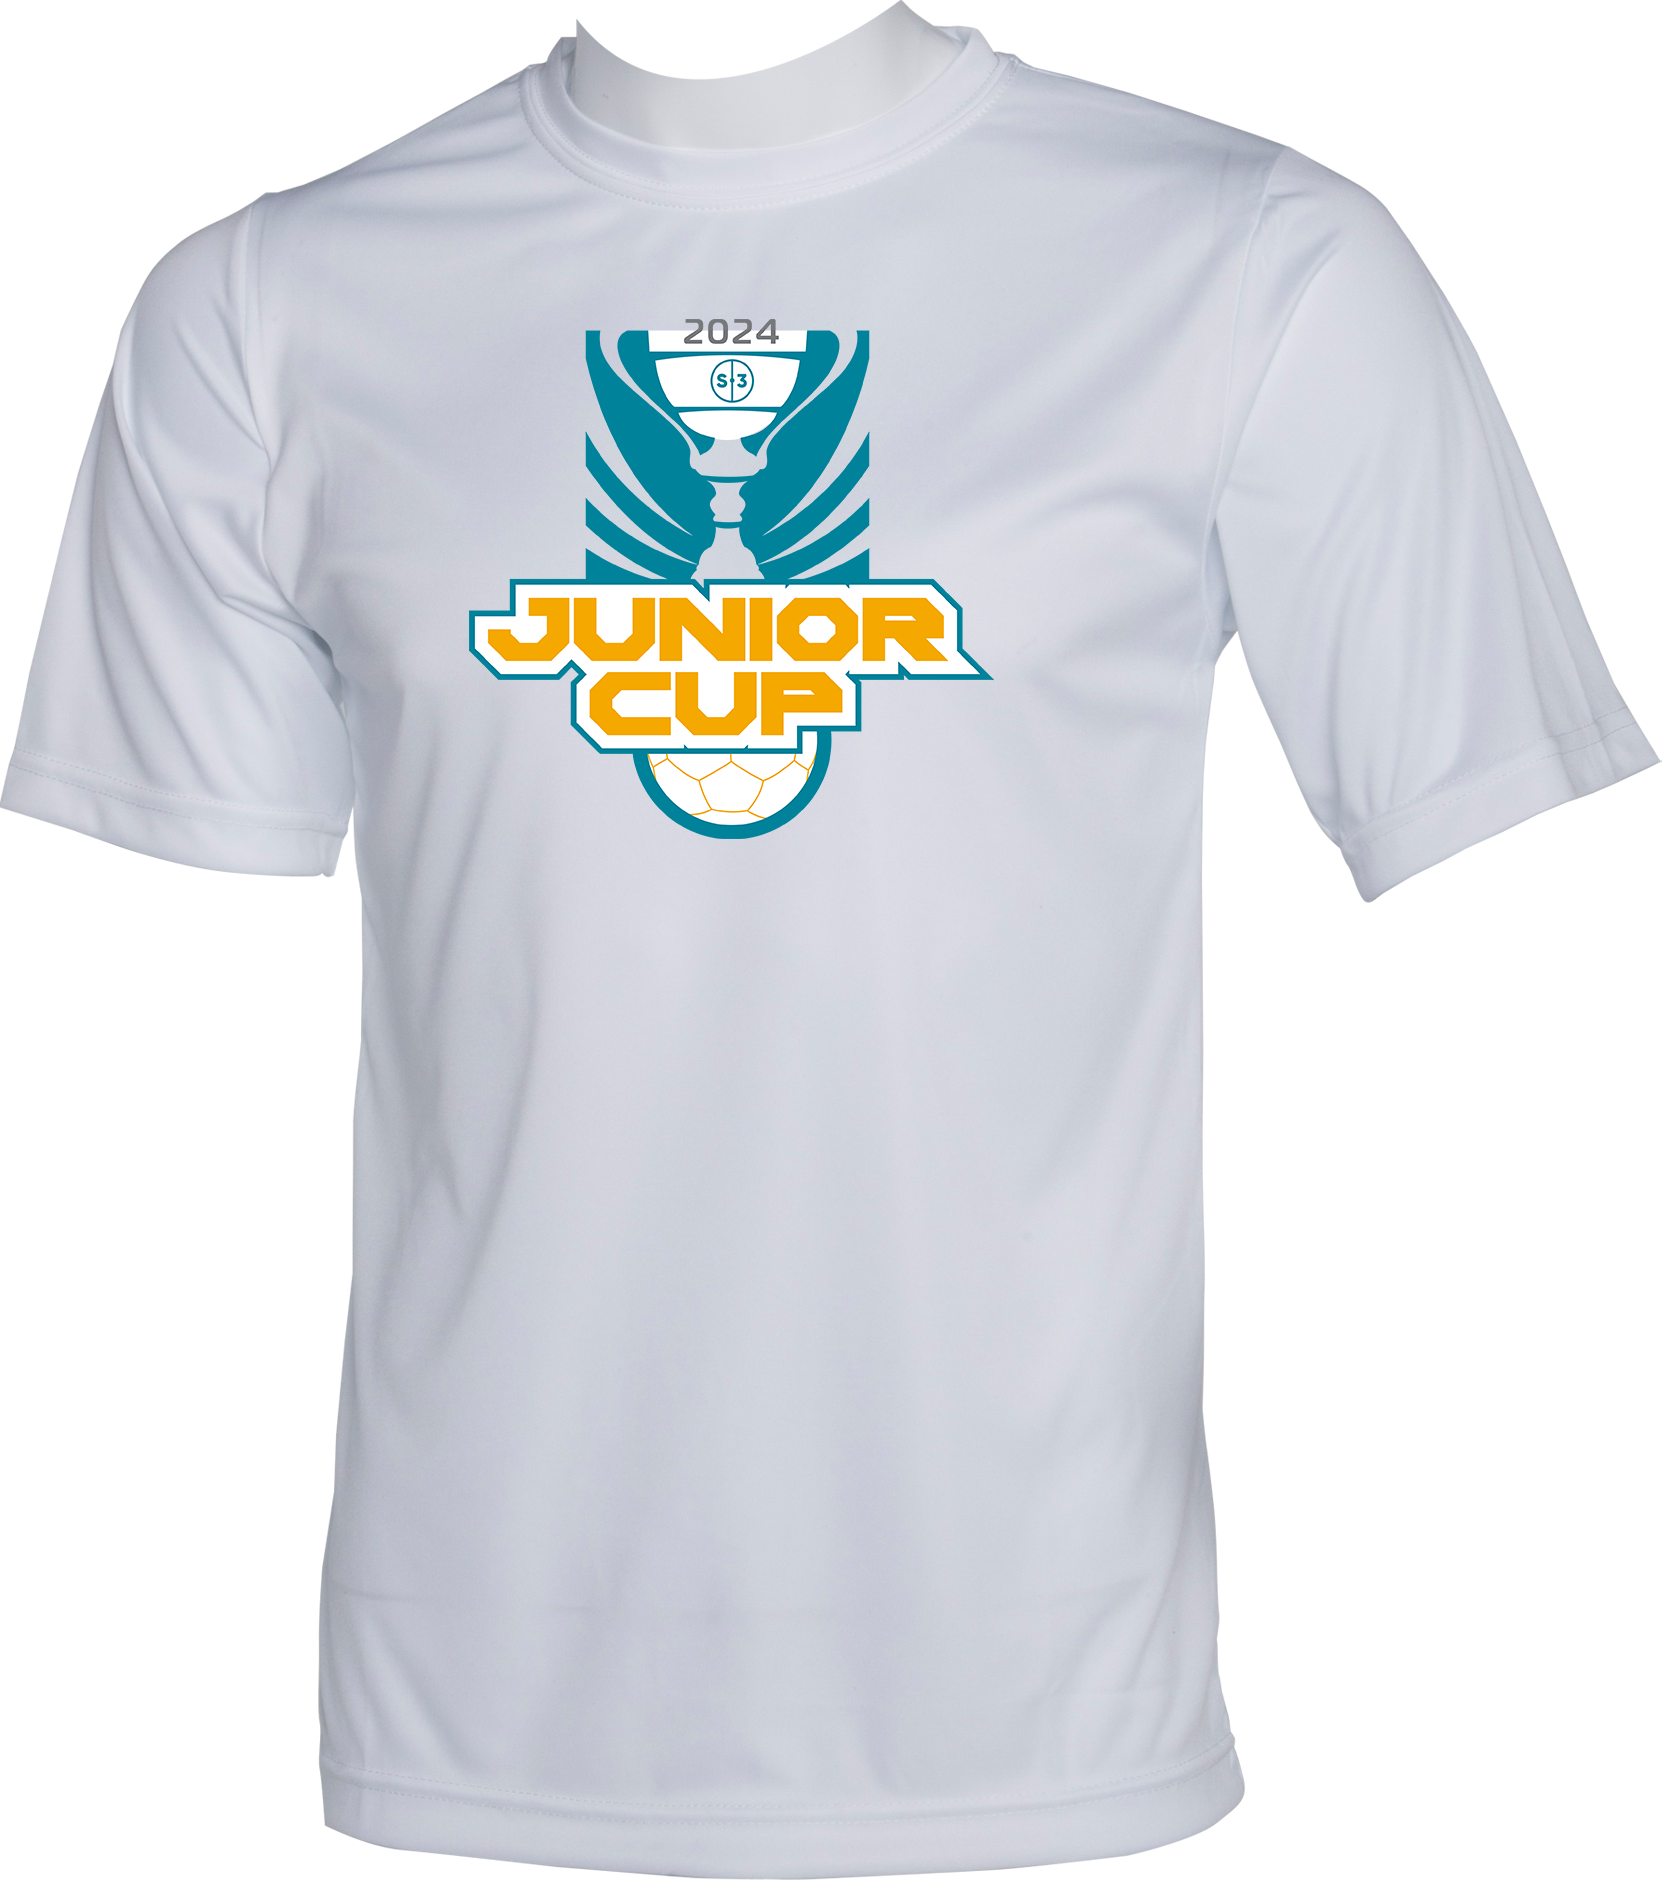 Performance Shirts - 2024 S3 Junior Cup